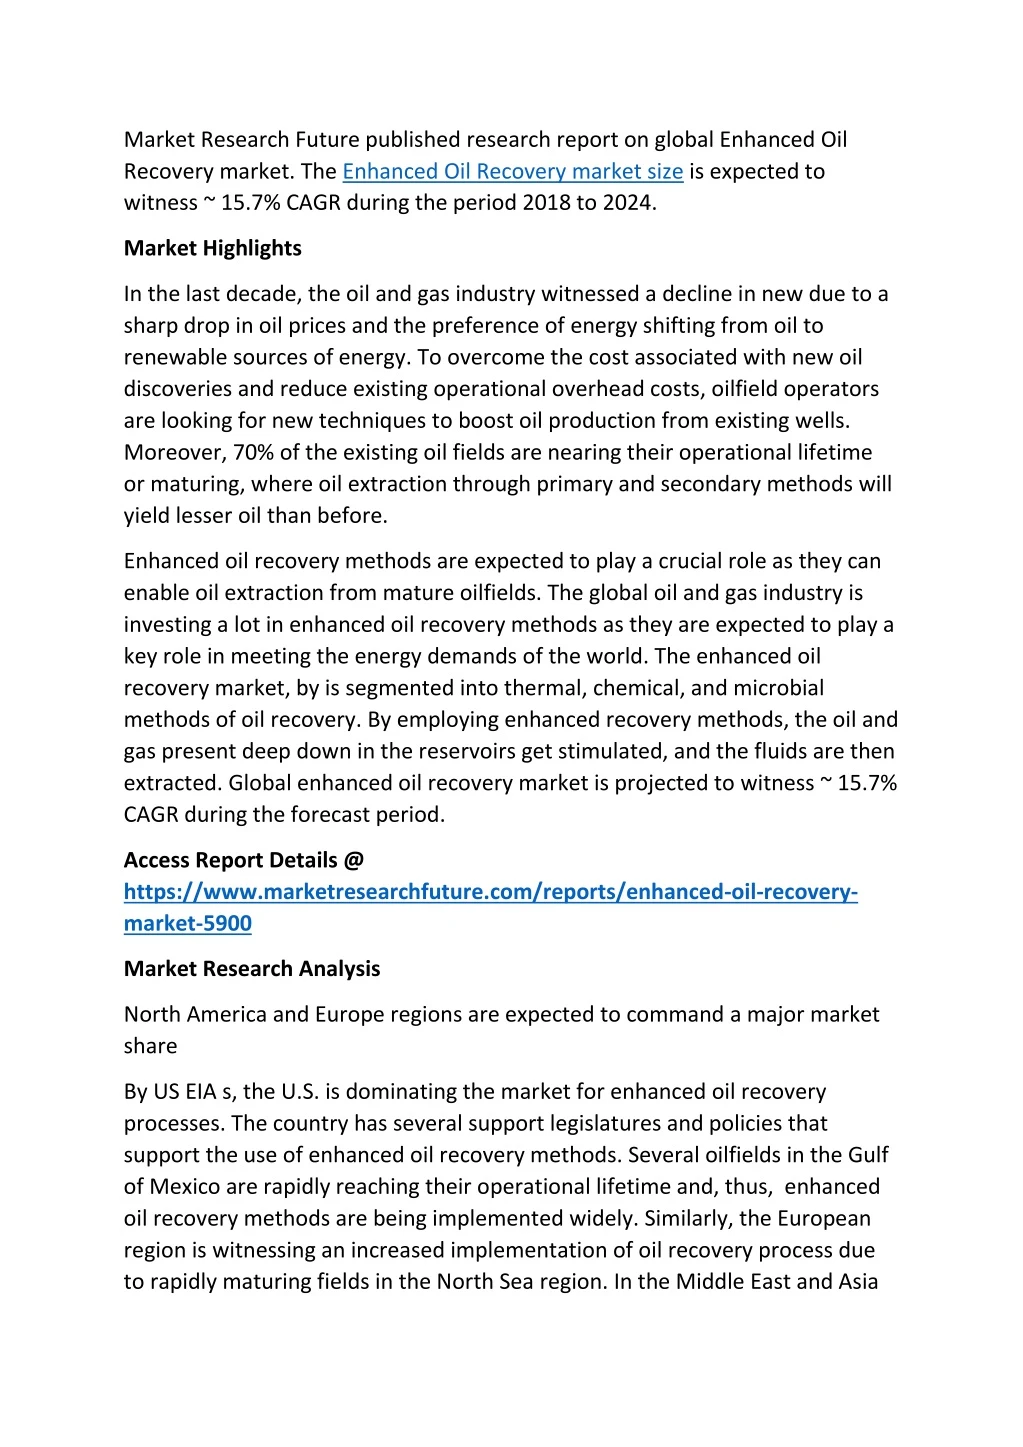 market research future published research report